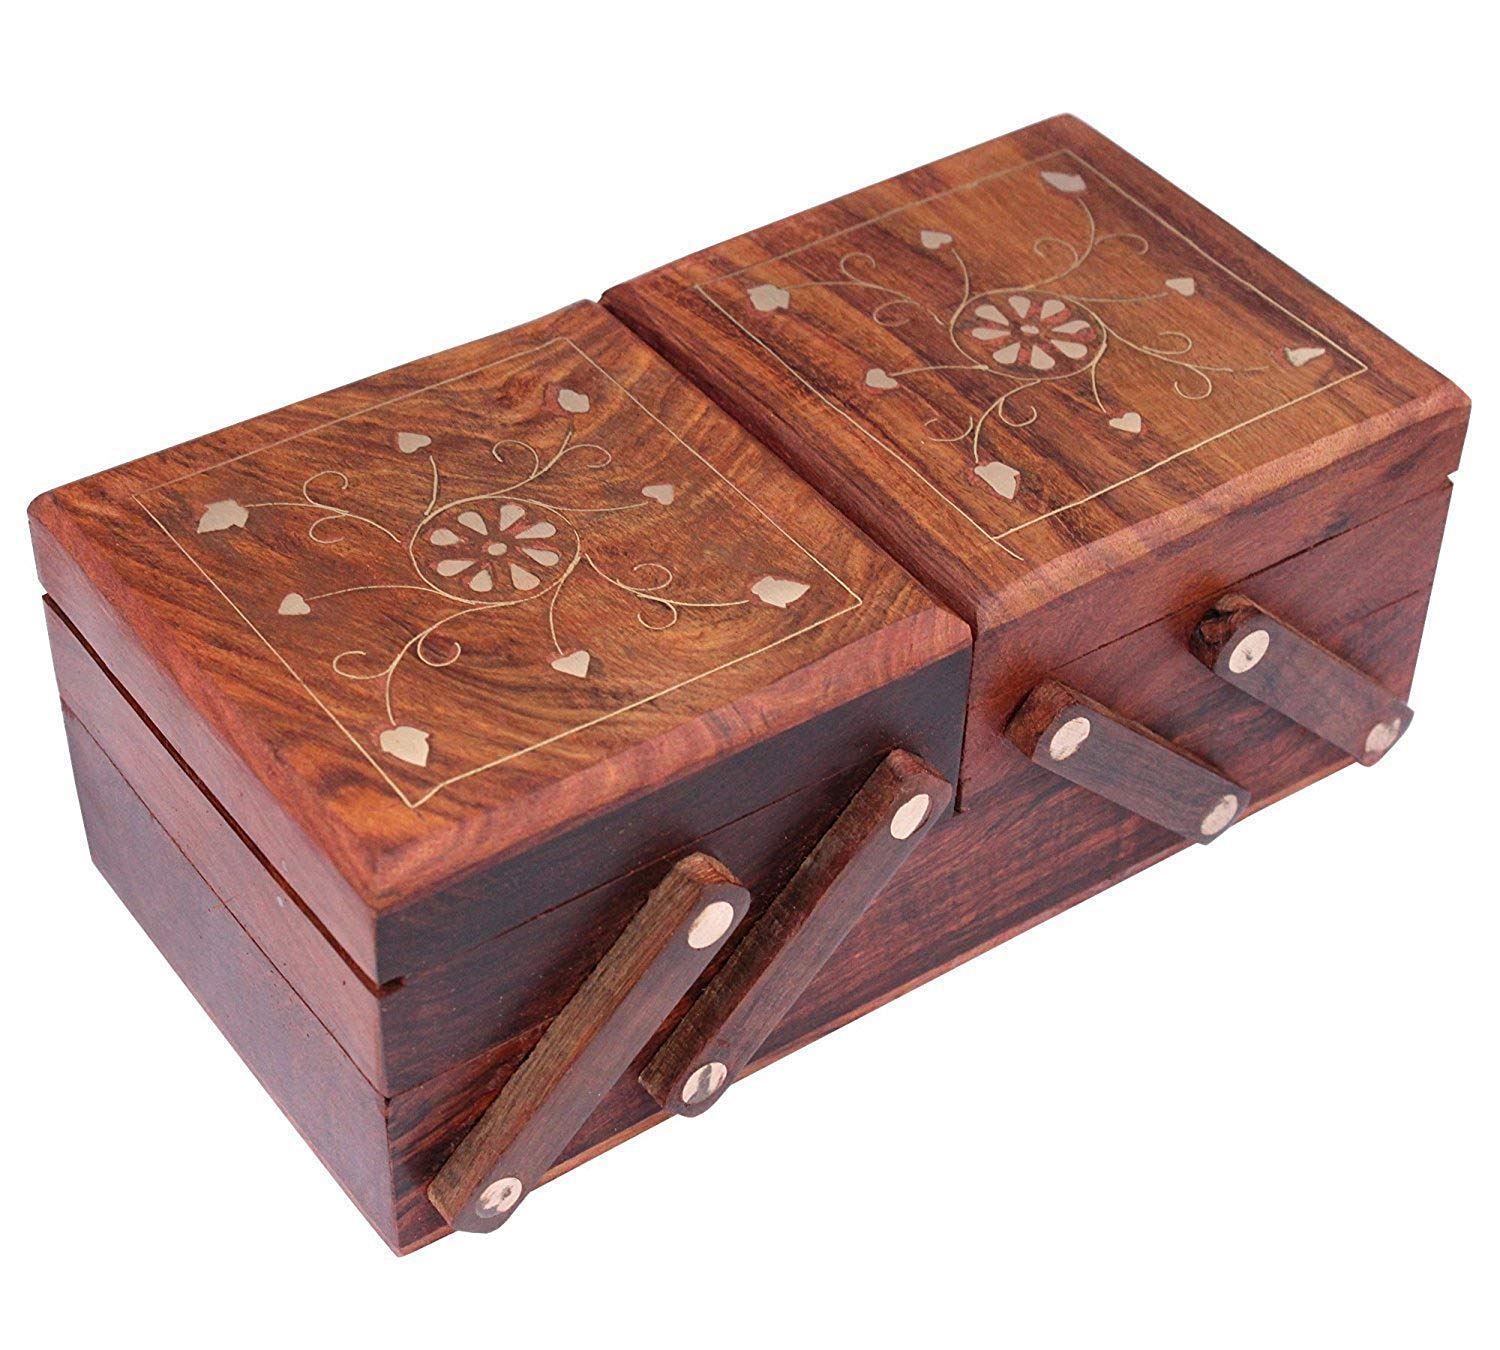 Handicrafts Wooden Jewellery Box for Women | Jewel Organizer Box Hand Carved Carvings, (8 inches) Gift Items